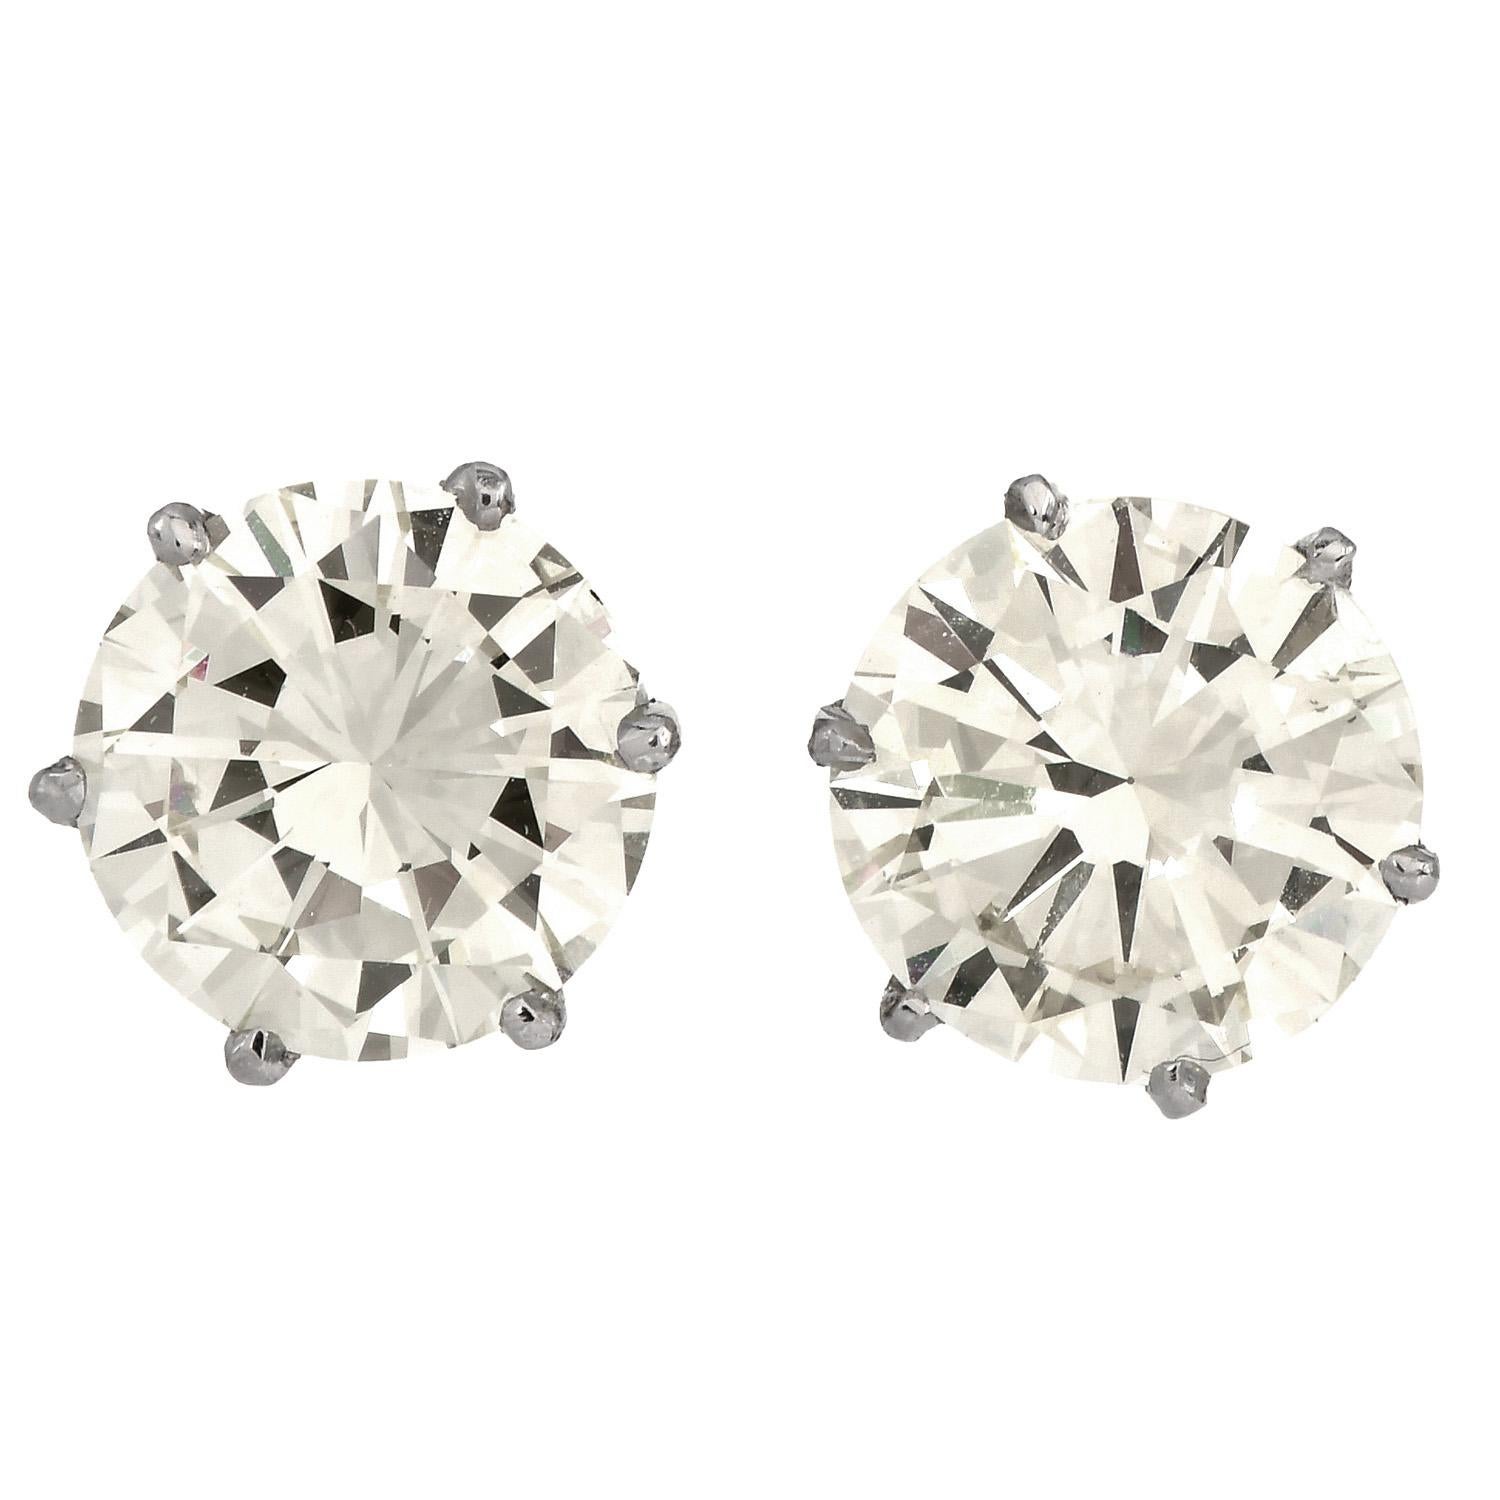 Classic and Elegant, an upgrade of luxury and love!

Estate 8.63 ct Round Cut Diamond Platinum Remarkable Stud Earrings. 

A staple in every woman's jewelry wardrobe is Classic Diamond Studs; go big or go home with these great-size